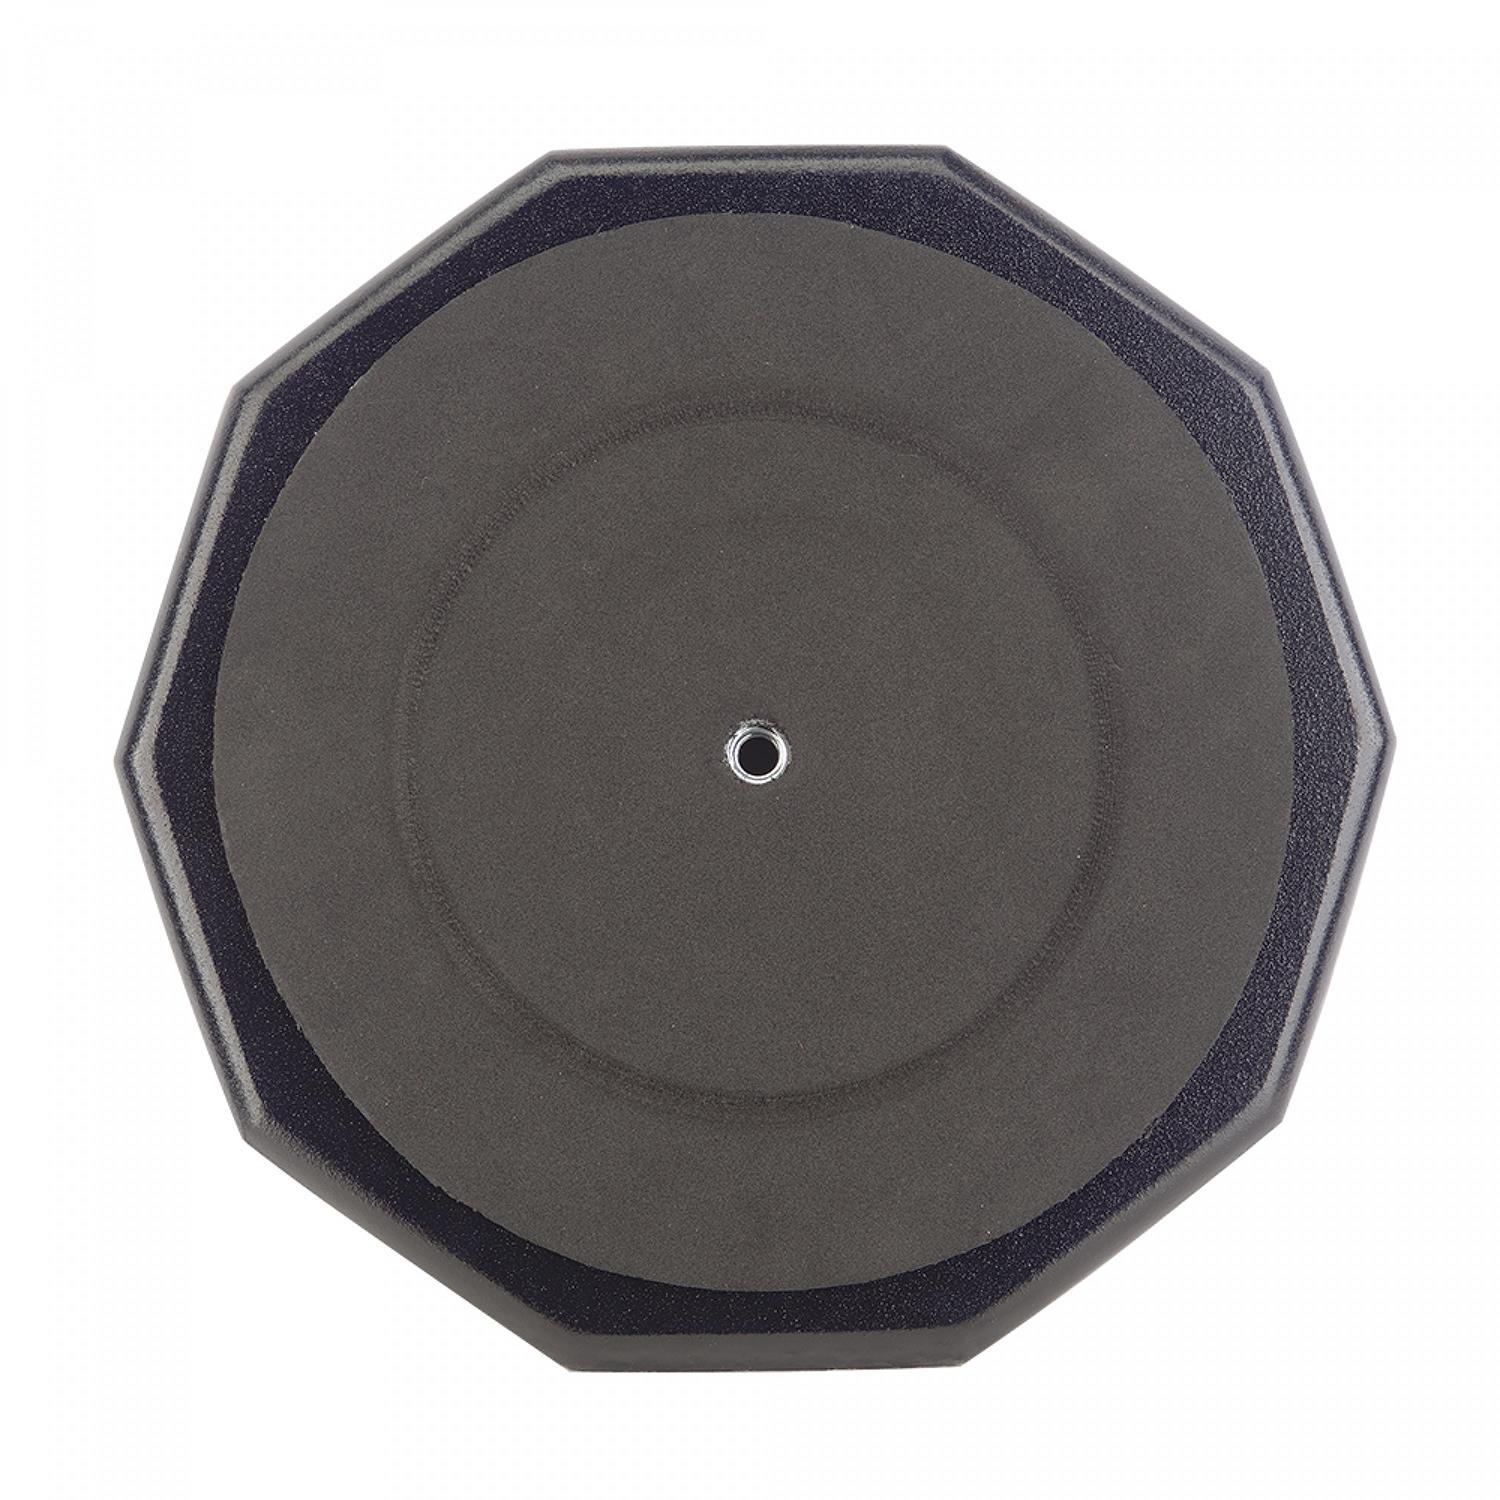 Stagg TD-08R 8" Practice Drum Pad - DY Pro Audio